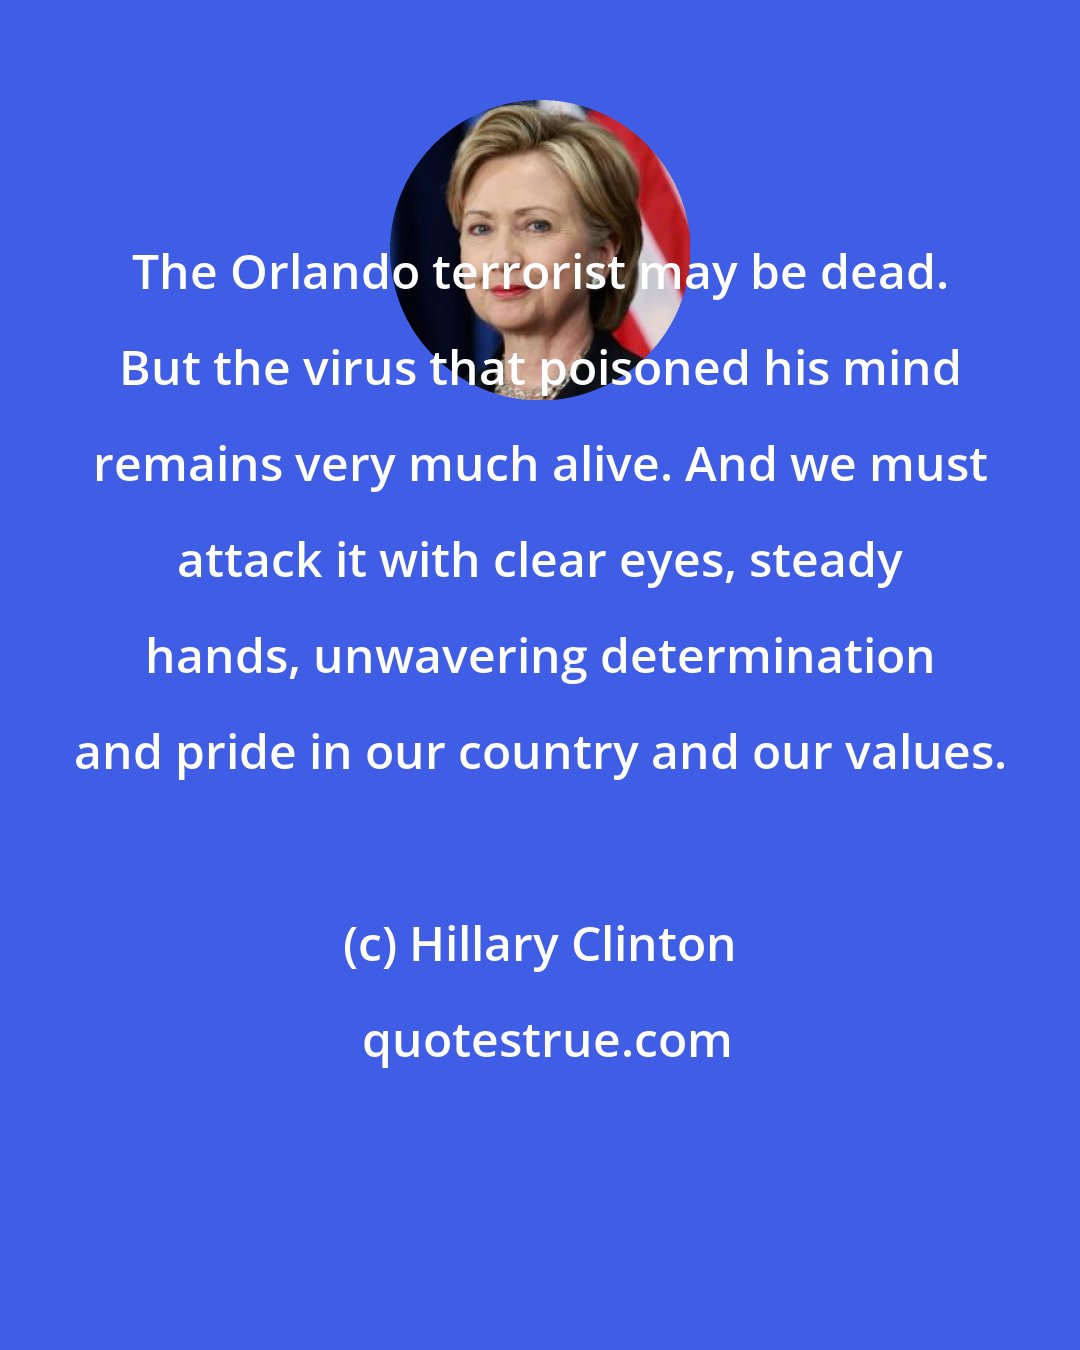 Hillary Clinton: The Orlando terrorist may be dead. But the virus that poisoned his mind remains very much alive. And we must attack it with clear eyes, steady hands, unwavering determination and pride in our country and our values.